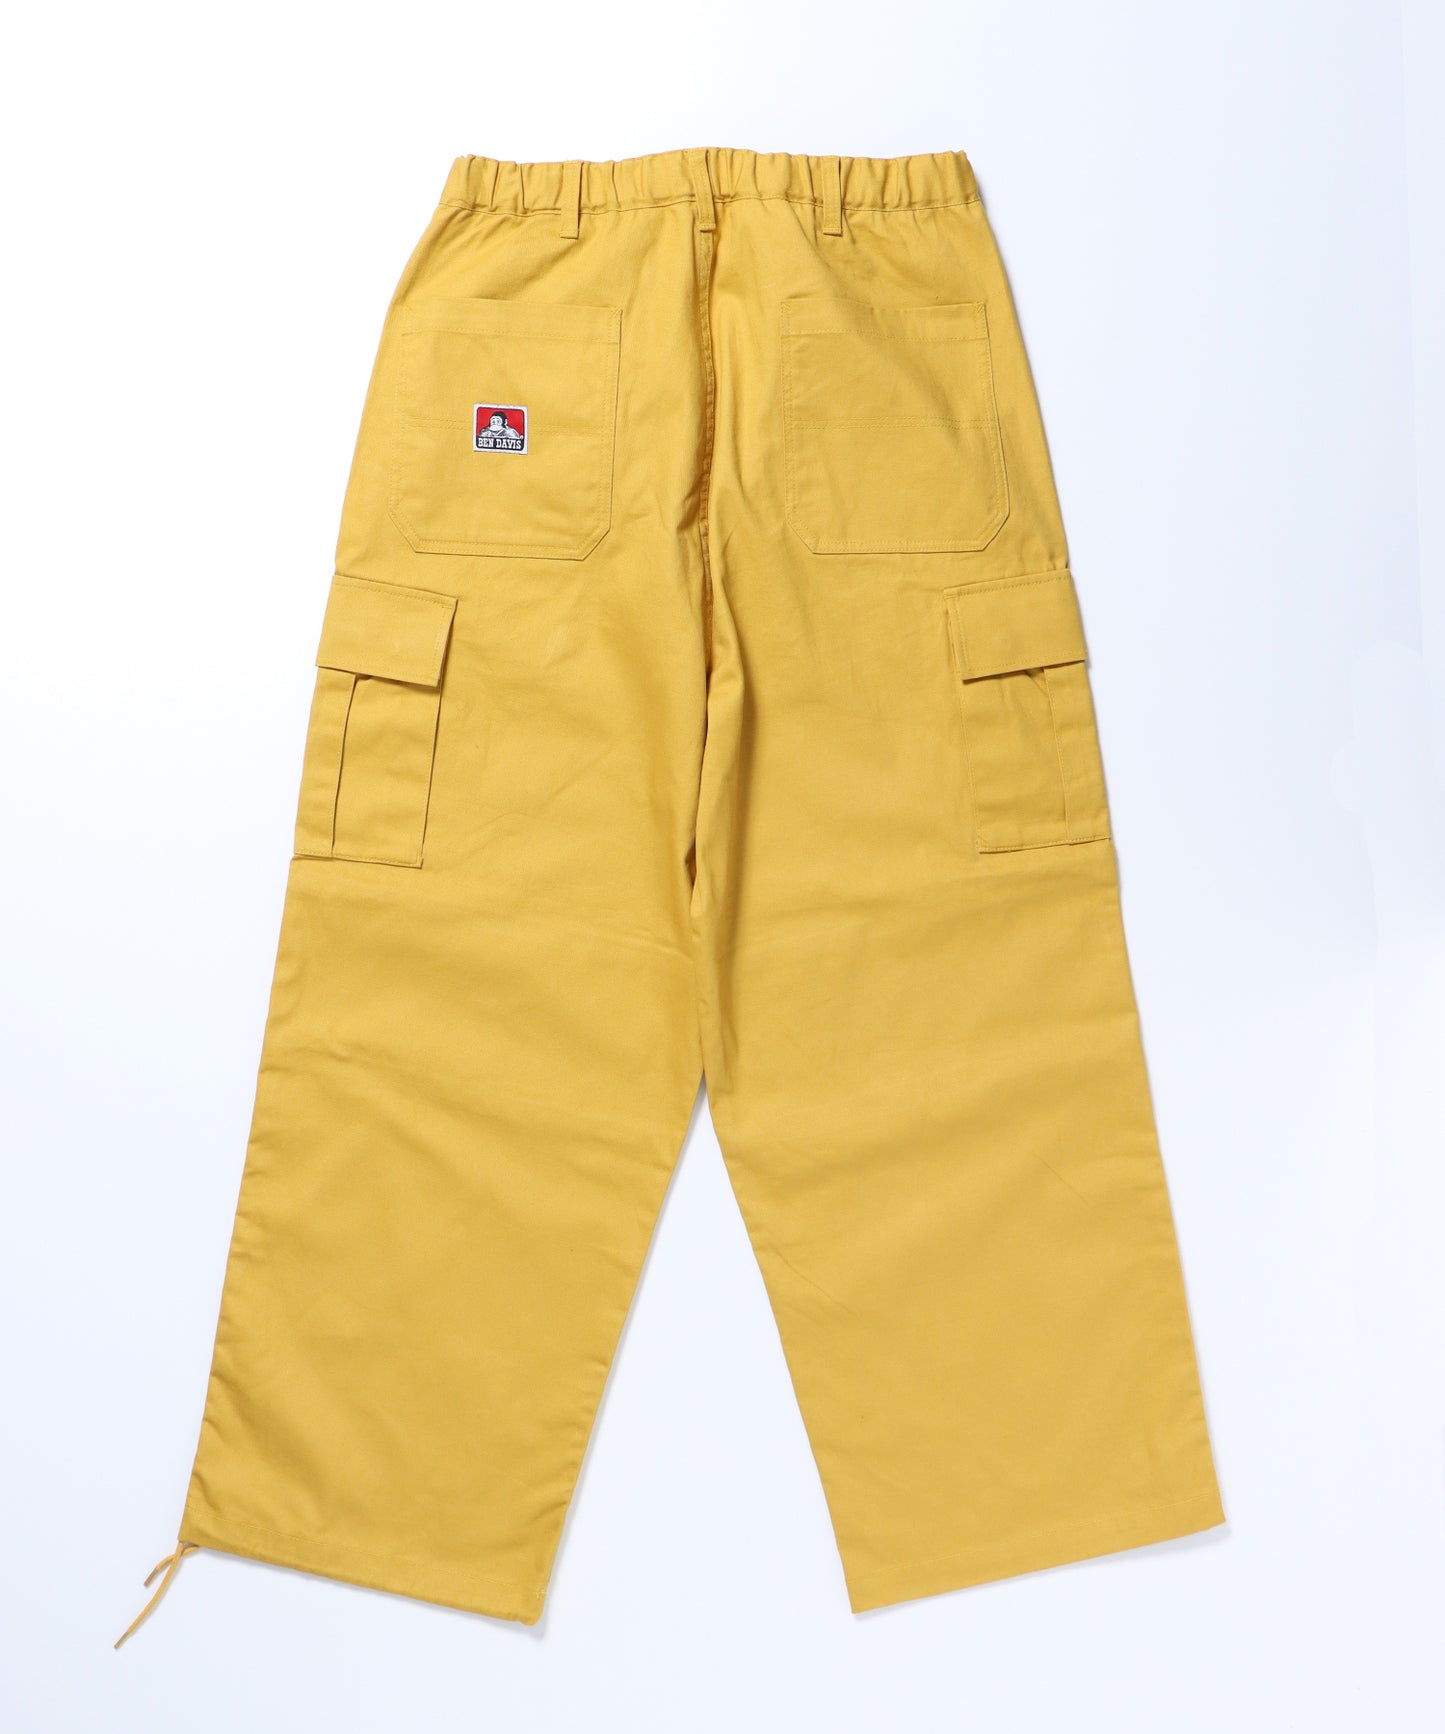 SNOW WORKERS PANTS / ルーズシルエット ワーク カラースノーパンツ 柄83